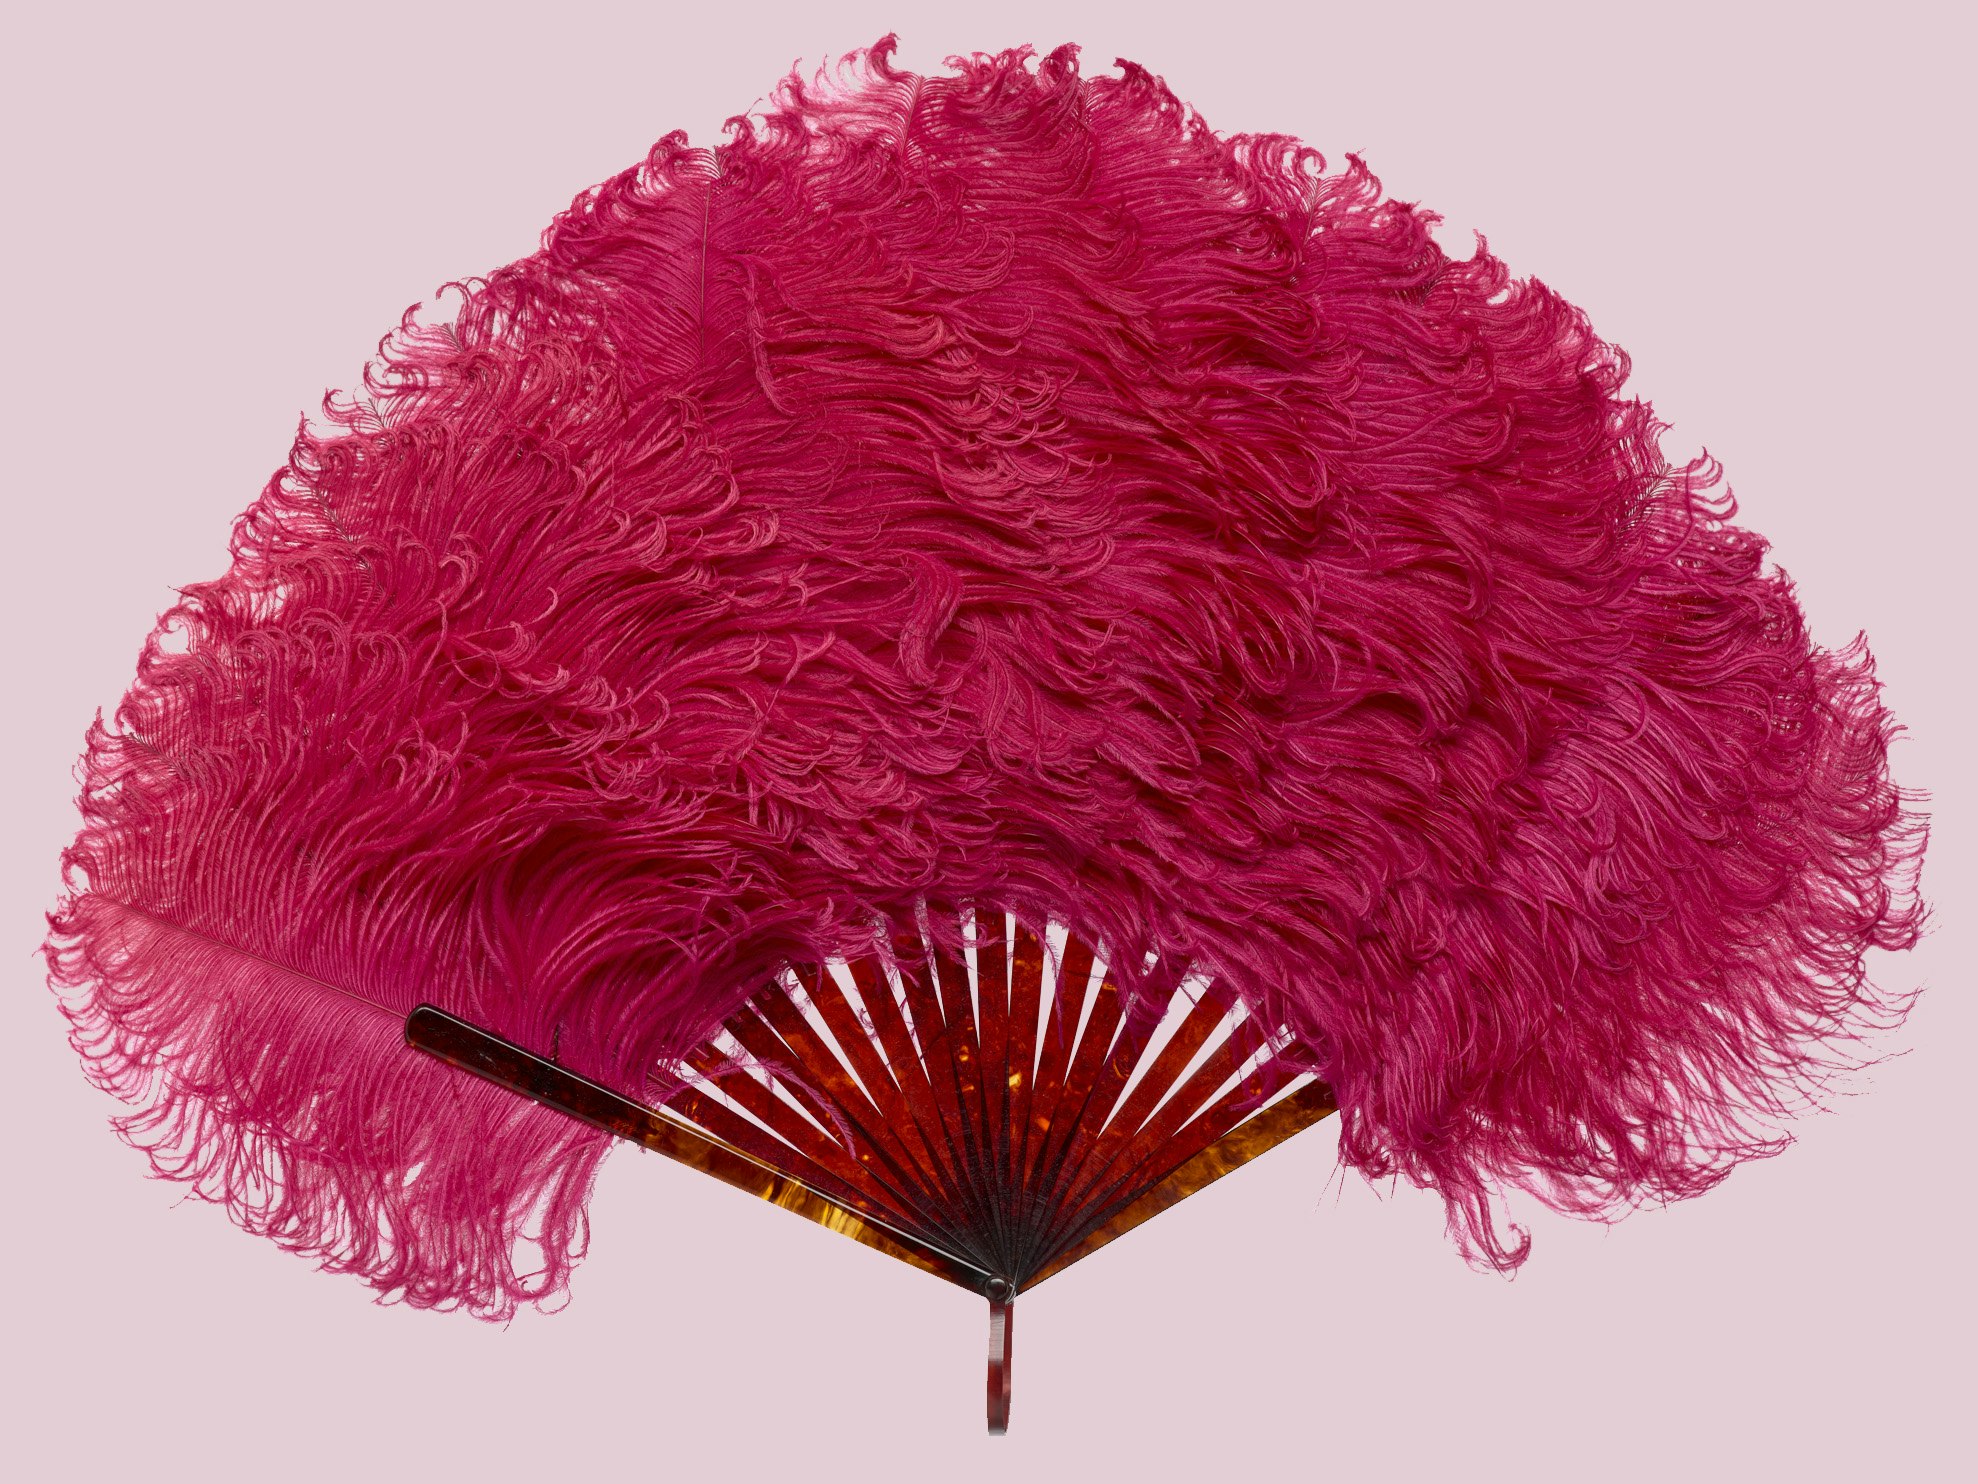 A hot pink feather fan on a light pink background